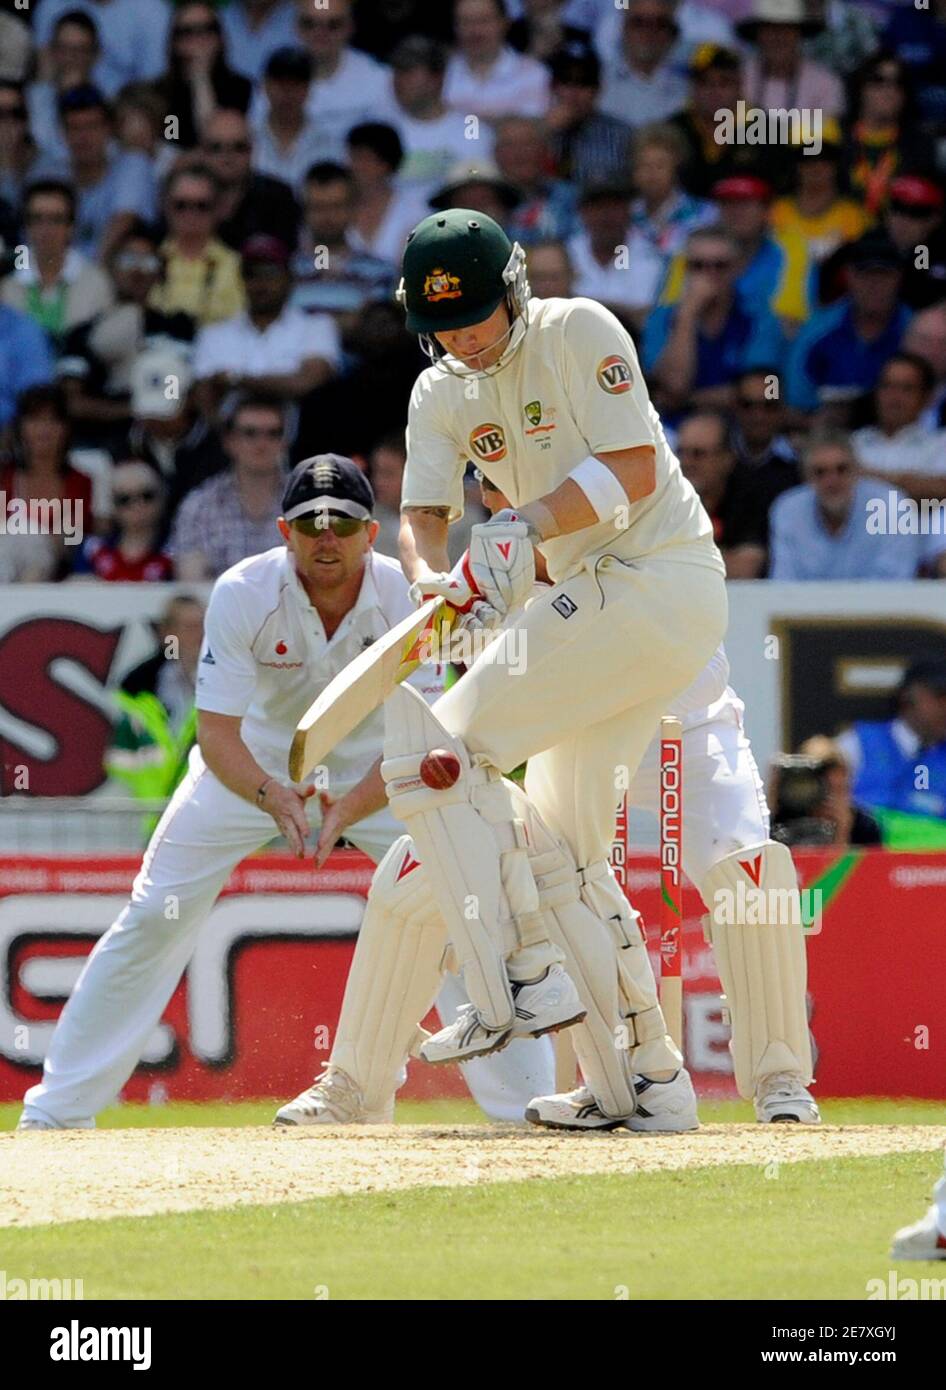 Australia's Michael Clarke plays a shot during the second day of the fourth Ashes cricket test match at Headingley in Leeds, northern England August 8, 2009. REUTERS/Nigel Roddis (BRITAIN SPORT CRICKET) Stock Photo